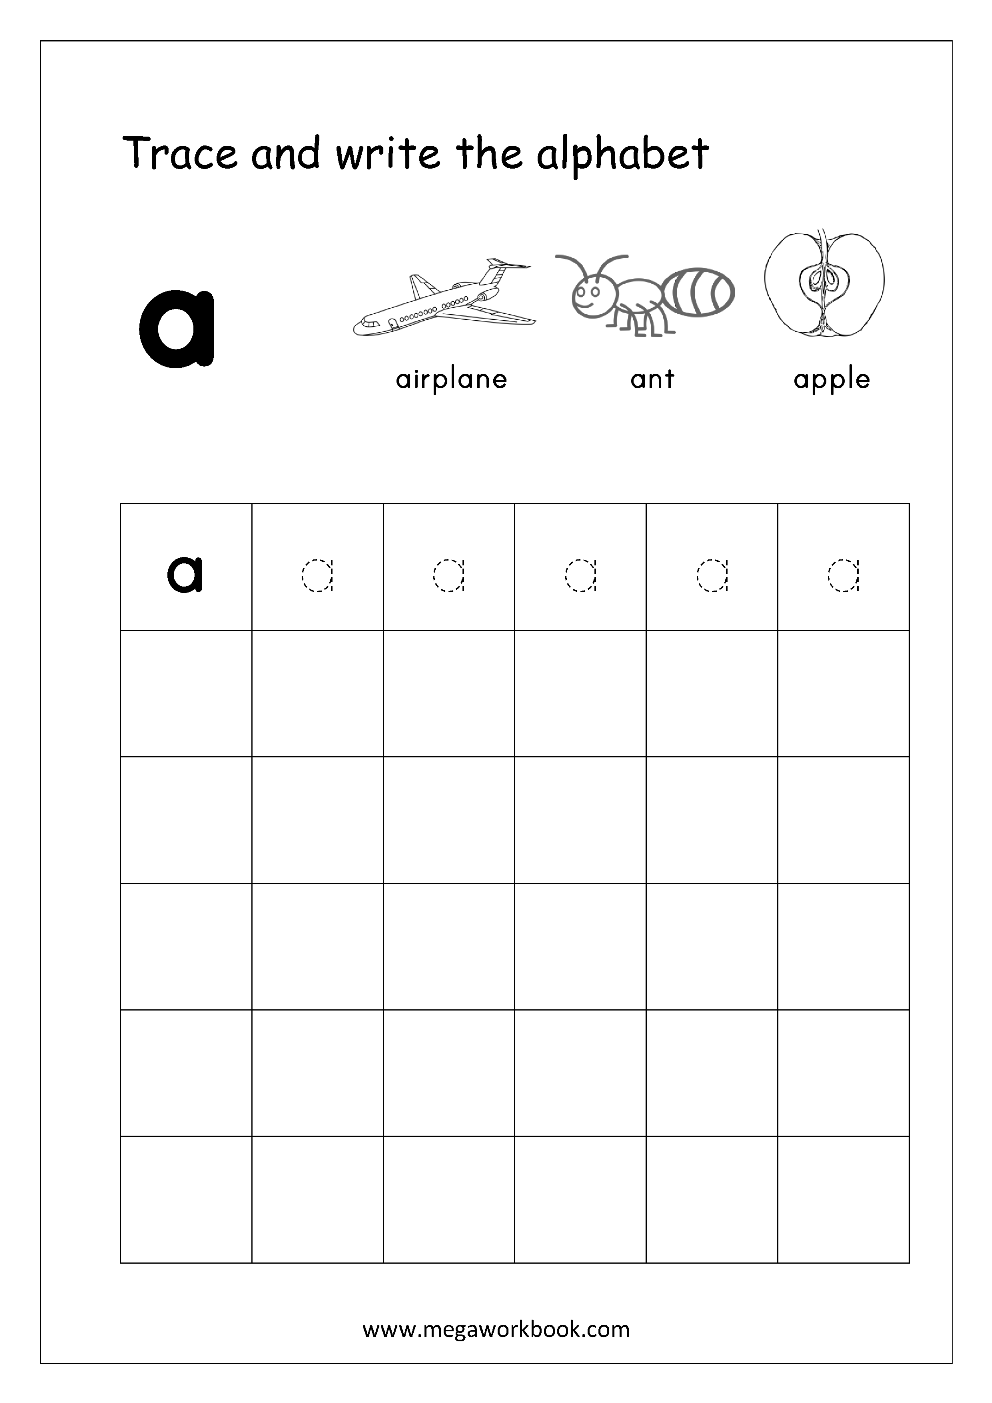 free-english-worksheets-alphabet-writing-small-letters-letter-tracing-writing-megaworkbook